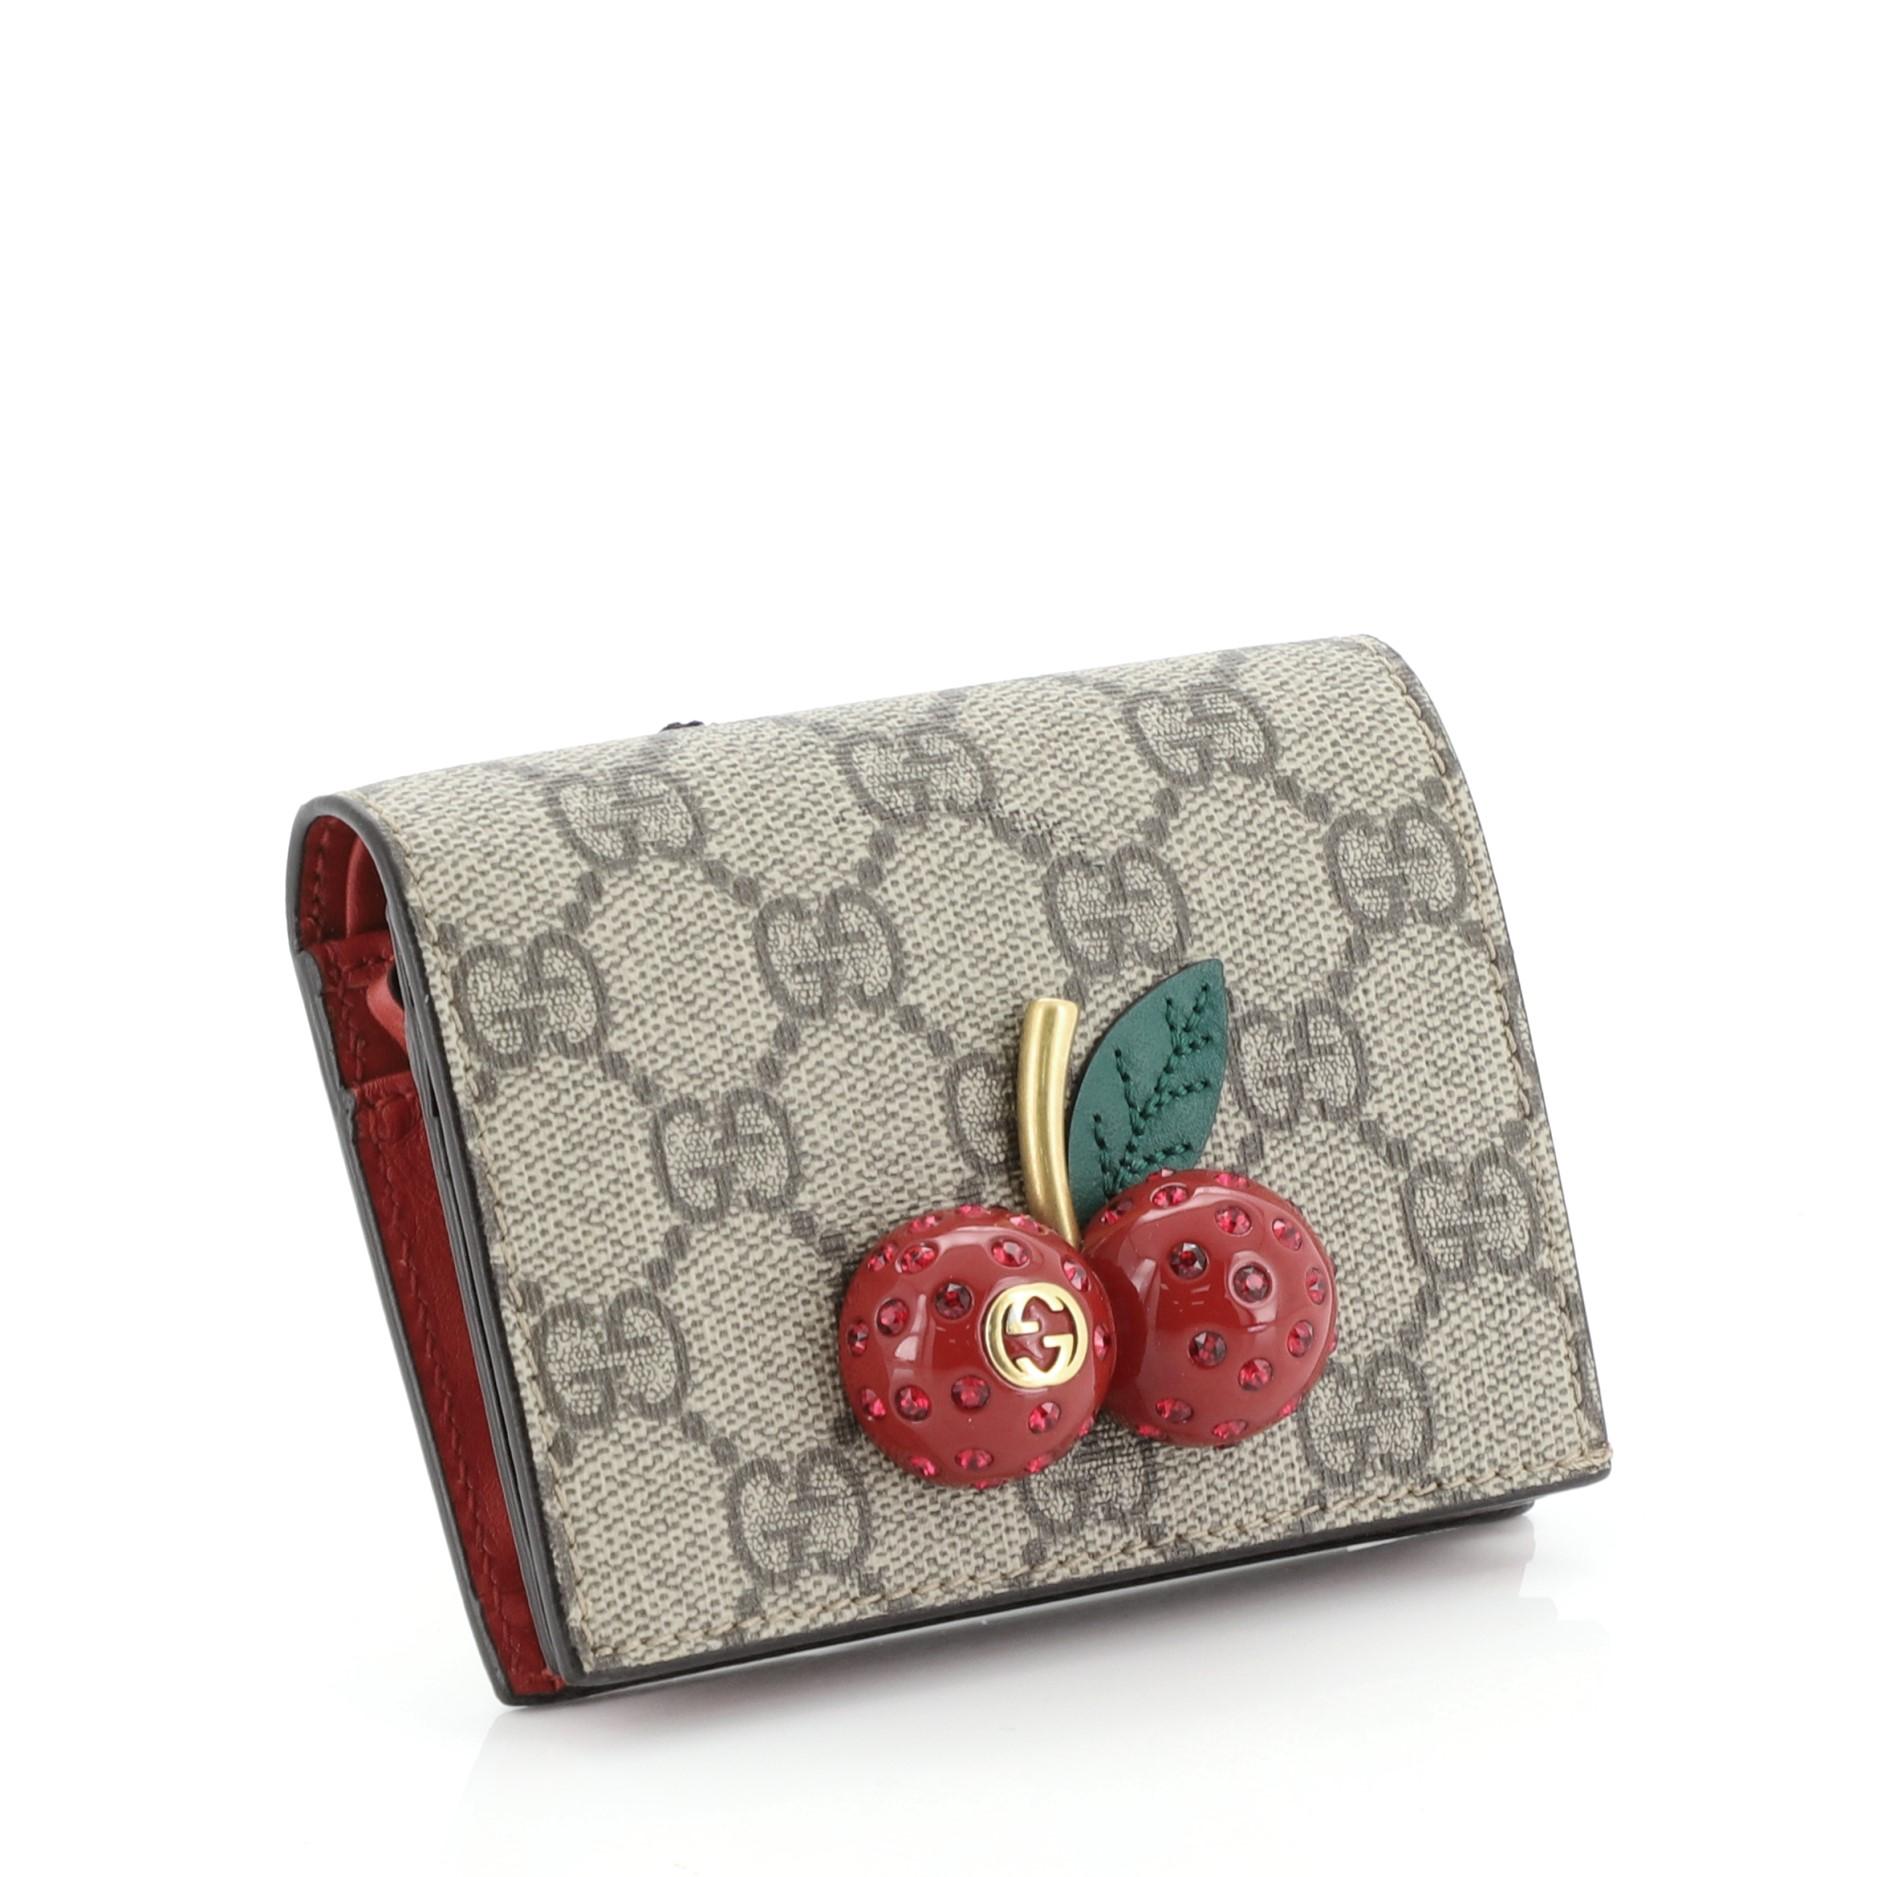 This Gucci Cherries Flap Card Case GG Coated Canvas, crafted from brown GG coated canvas, features 3D jeweled cherry embellishment with a gold stem and interlocking GG logo and aged gold-tone hardware. Its snap button closure opens to a red leather